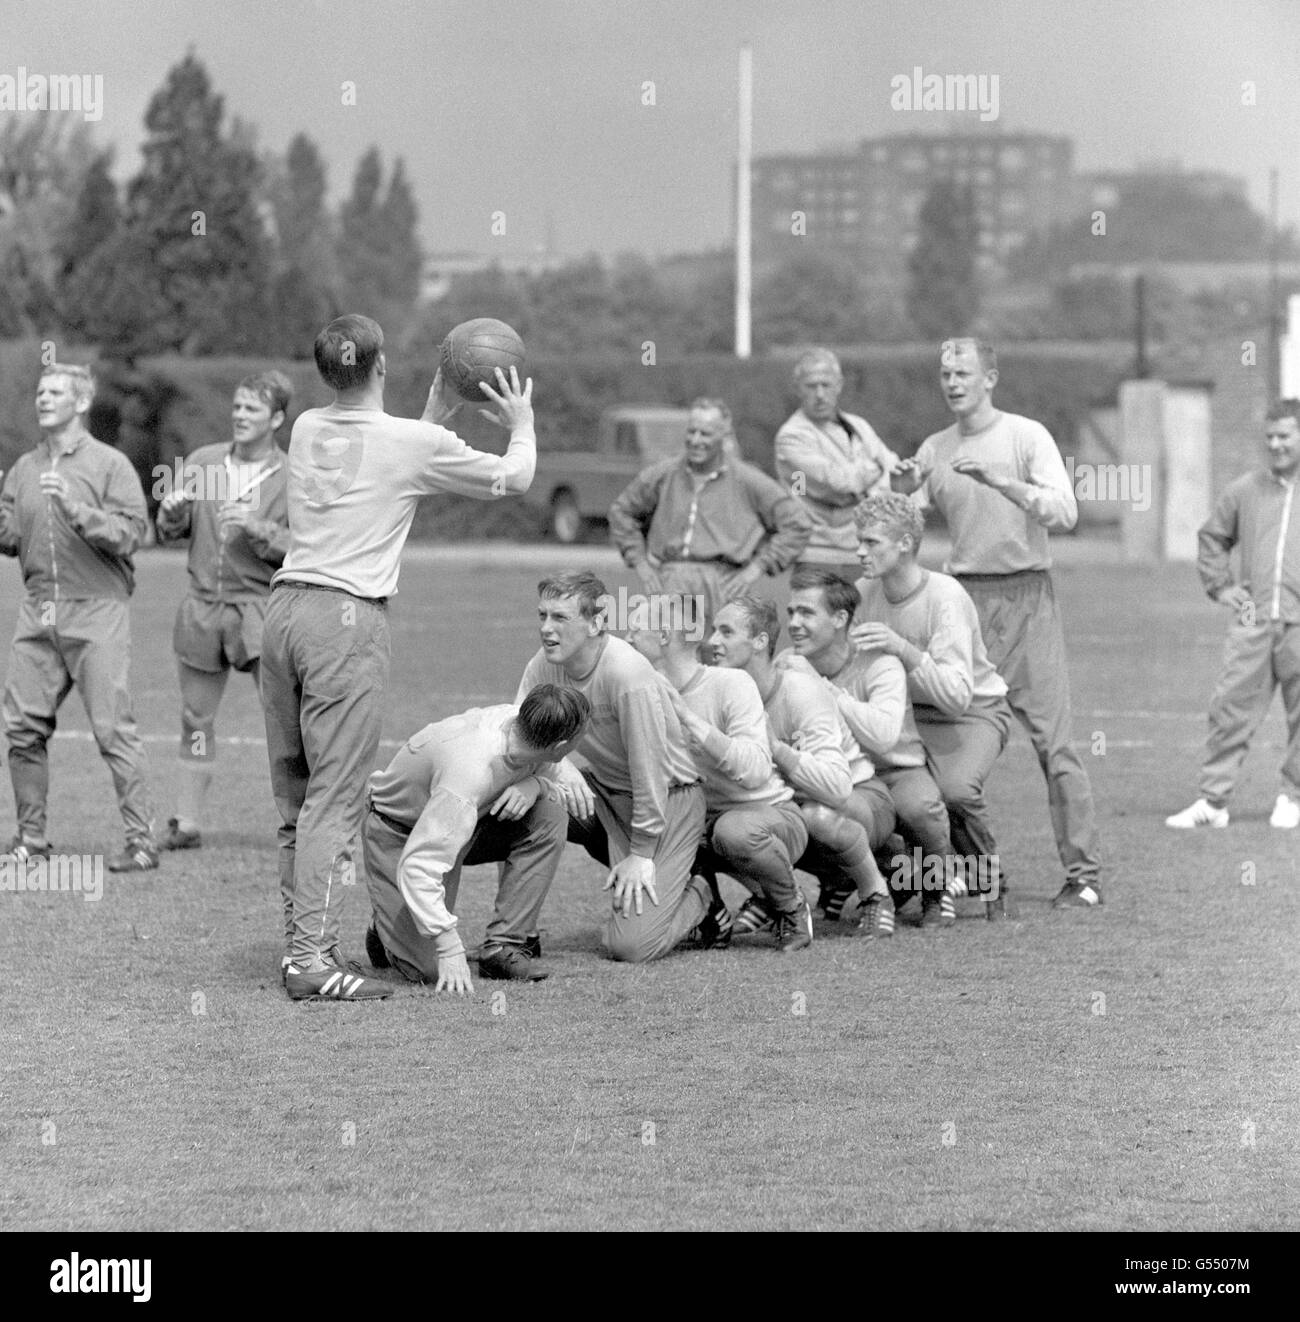 The Sweden team train at New Beckenham in preparation for their friendly against England. Thomas Nordahl throws the ball to goalkeeper Sven-Gunnar Larsson over a handful of players kneeling, including Glasgow Rangers Orjan Persson (second in line kneeling) Stock Photo